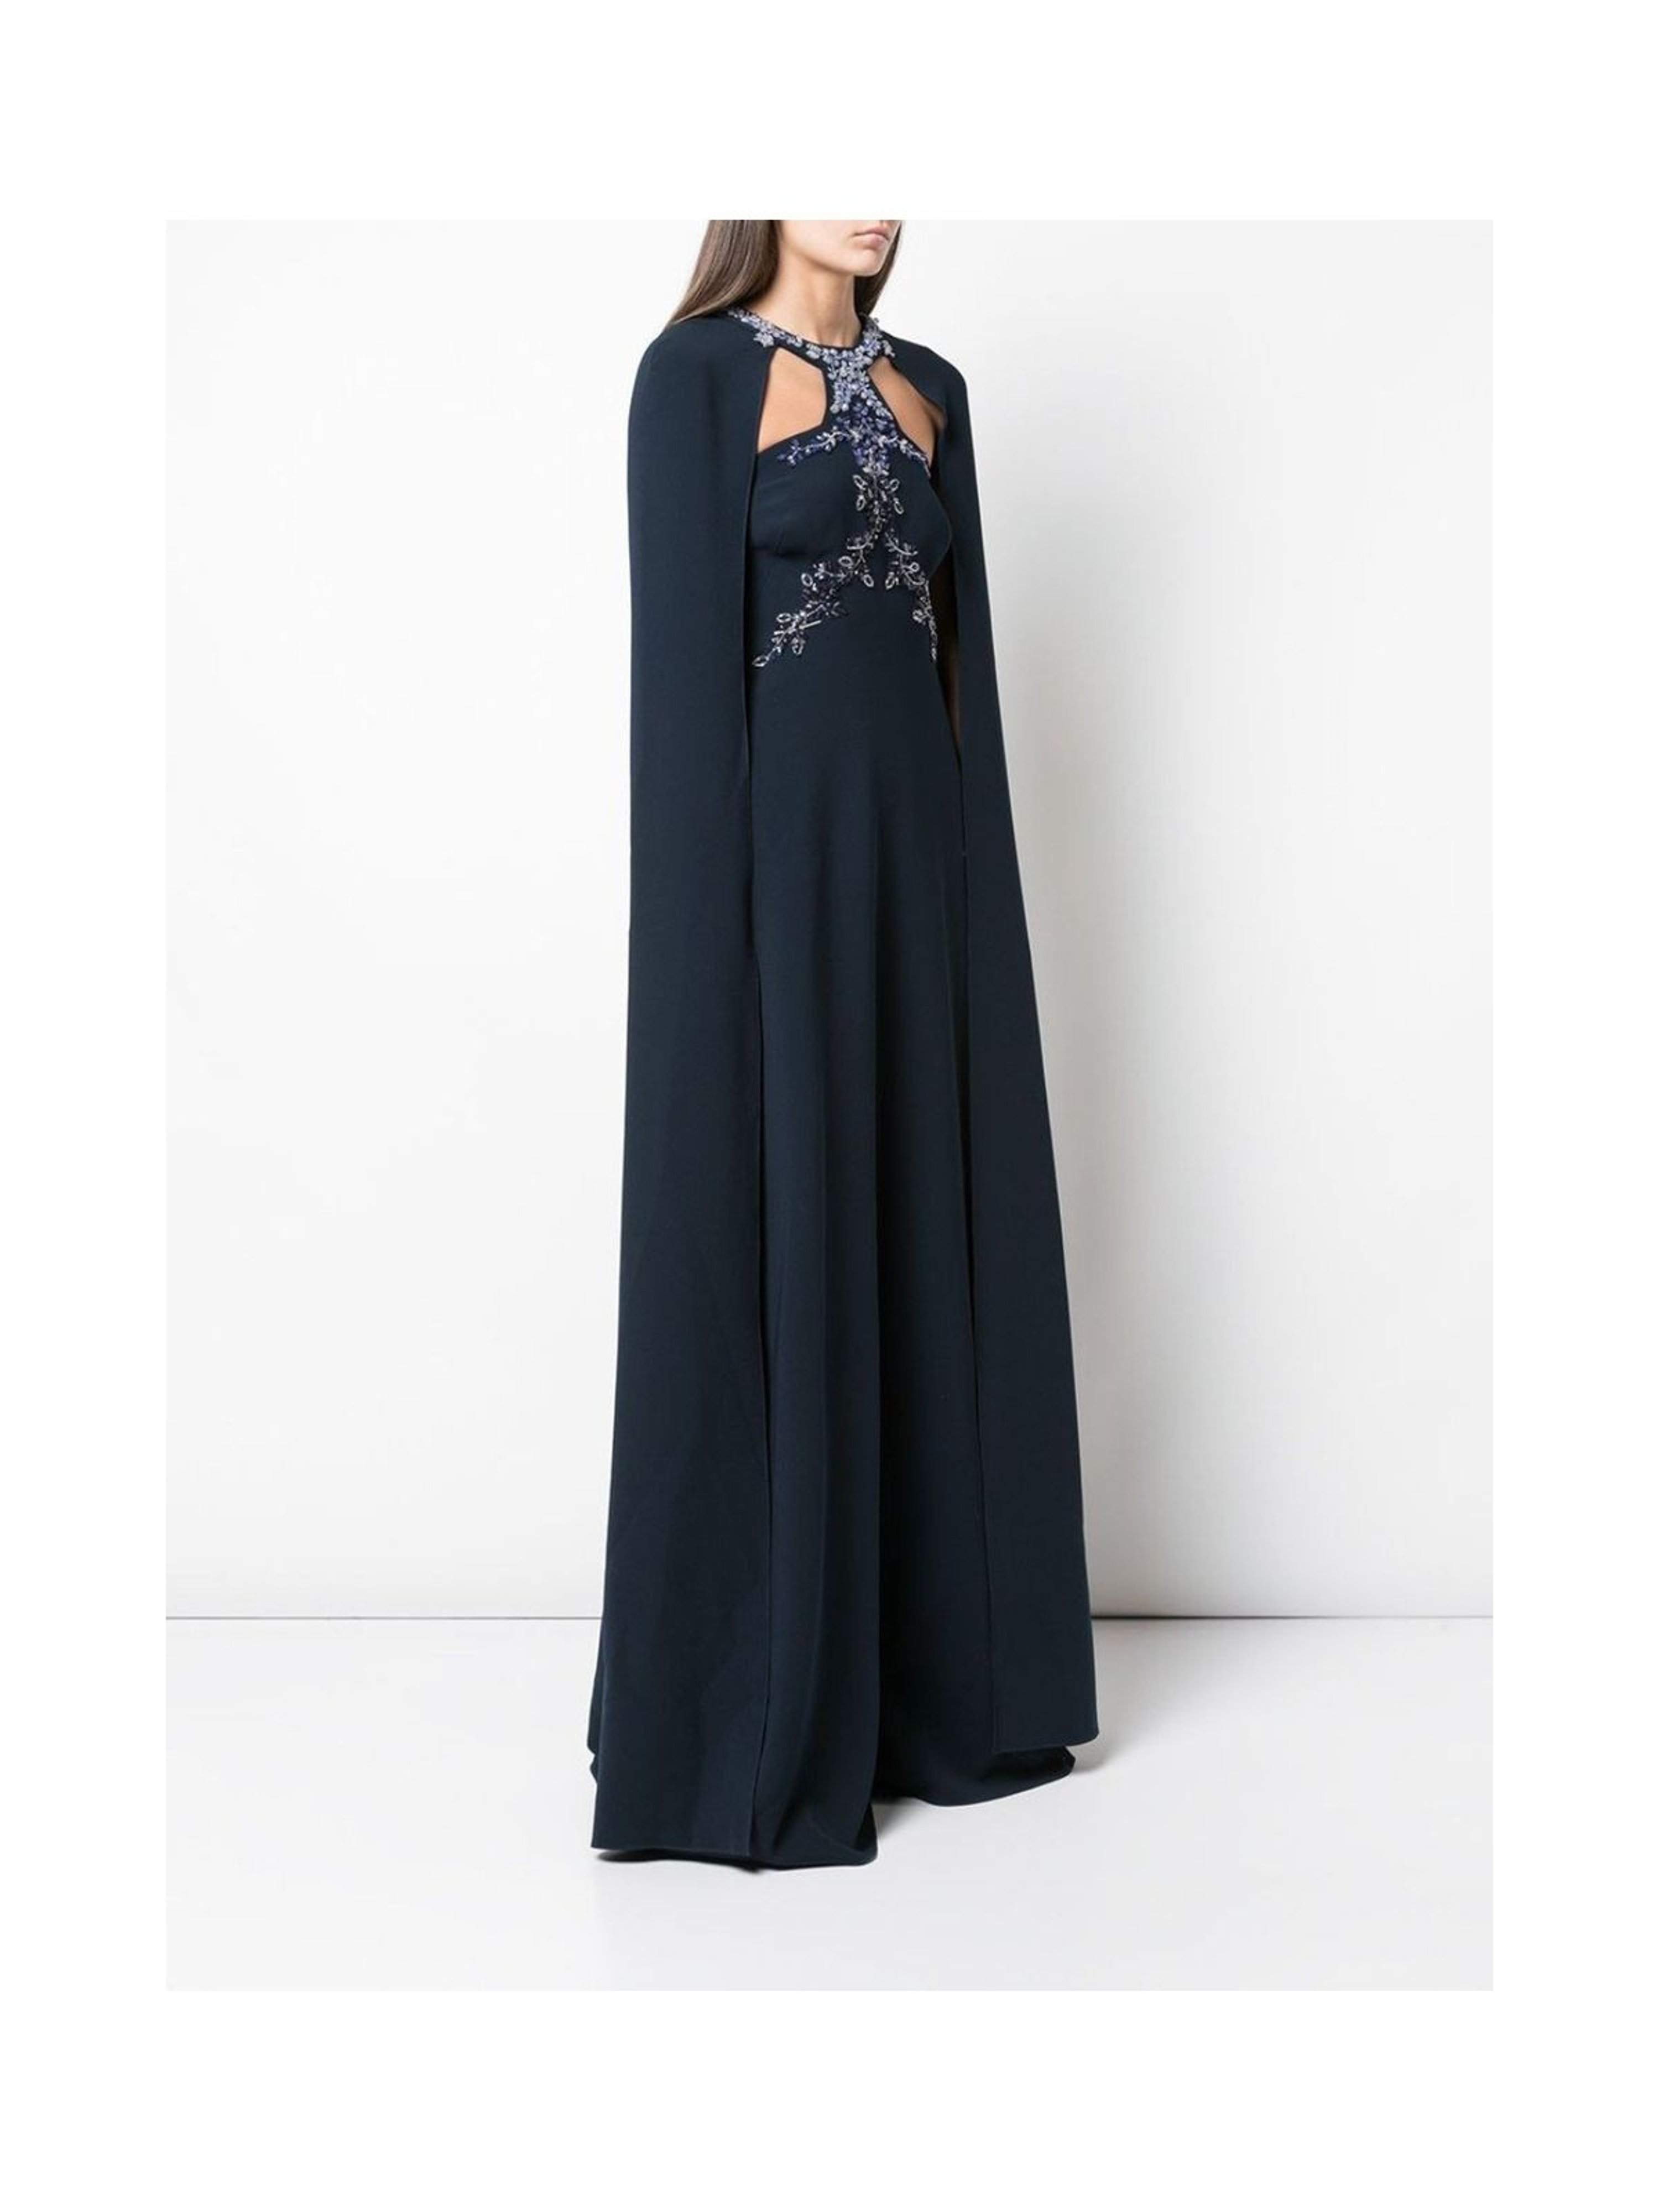 MARCHESA NOTTE MARCHESA NOTTE BEADED EMBROIDERED CREPE CAPE GOWN